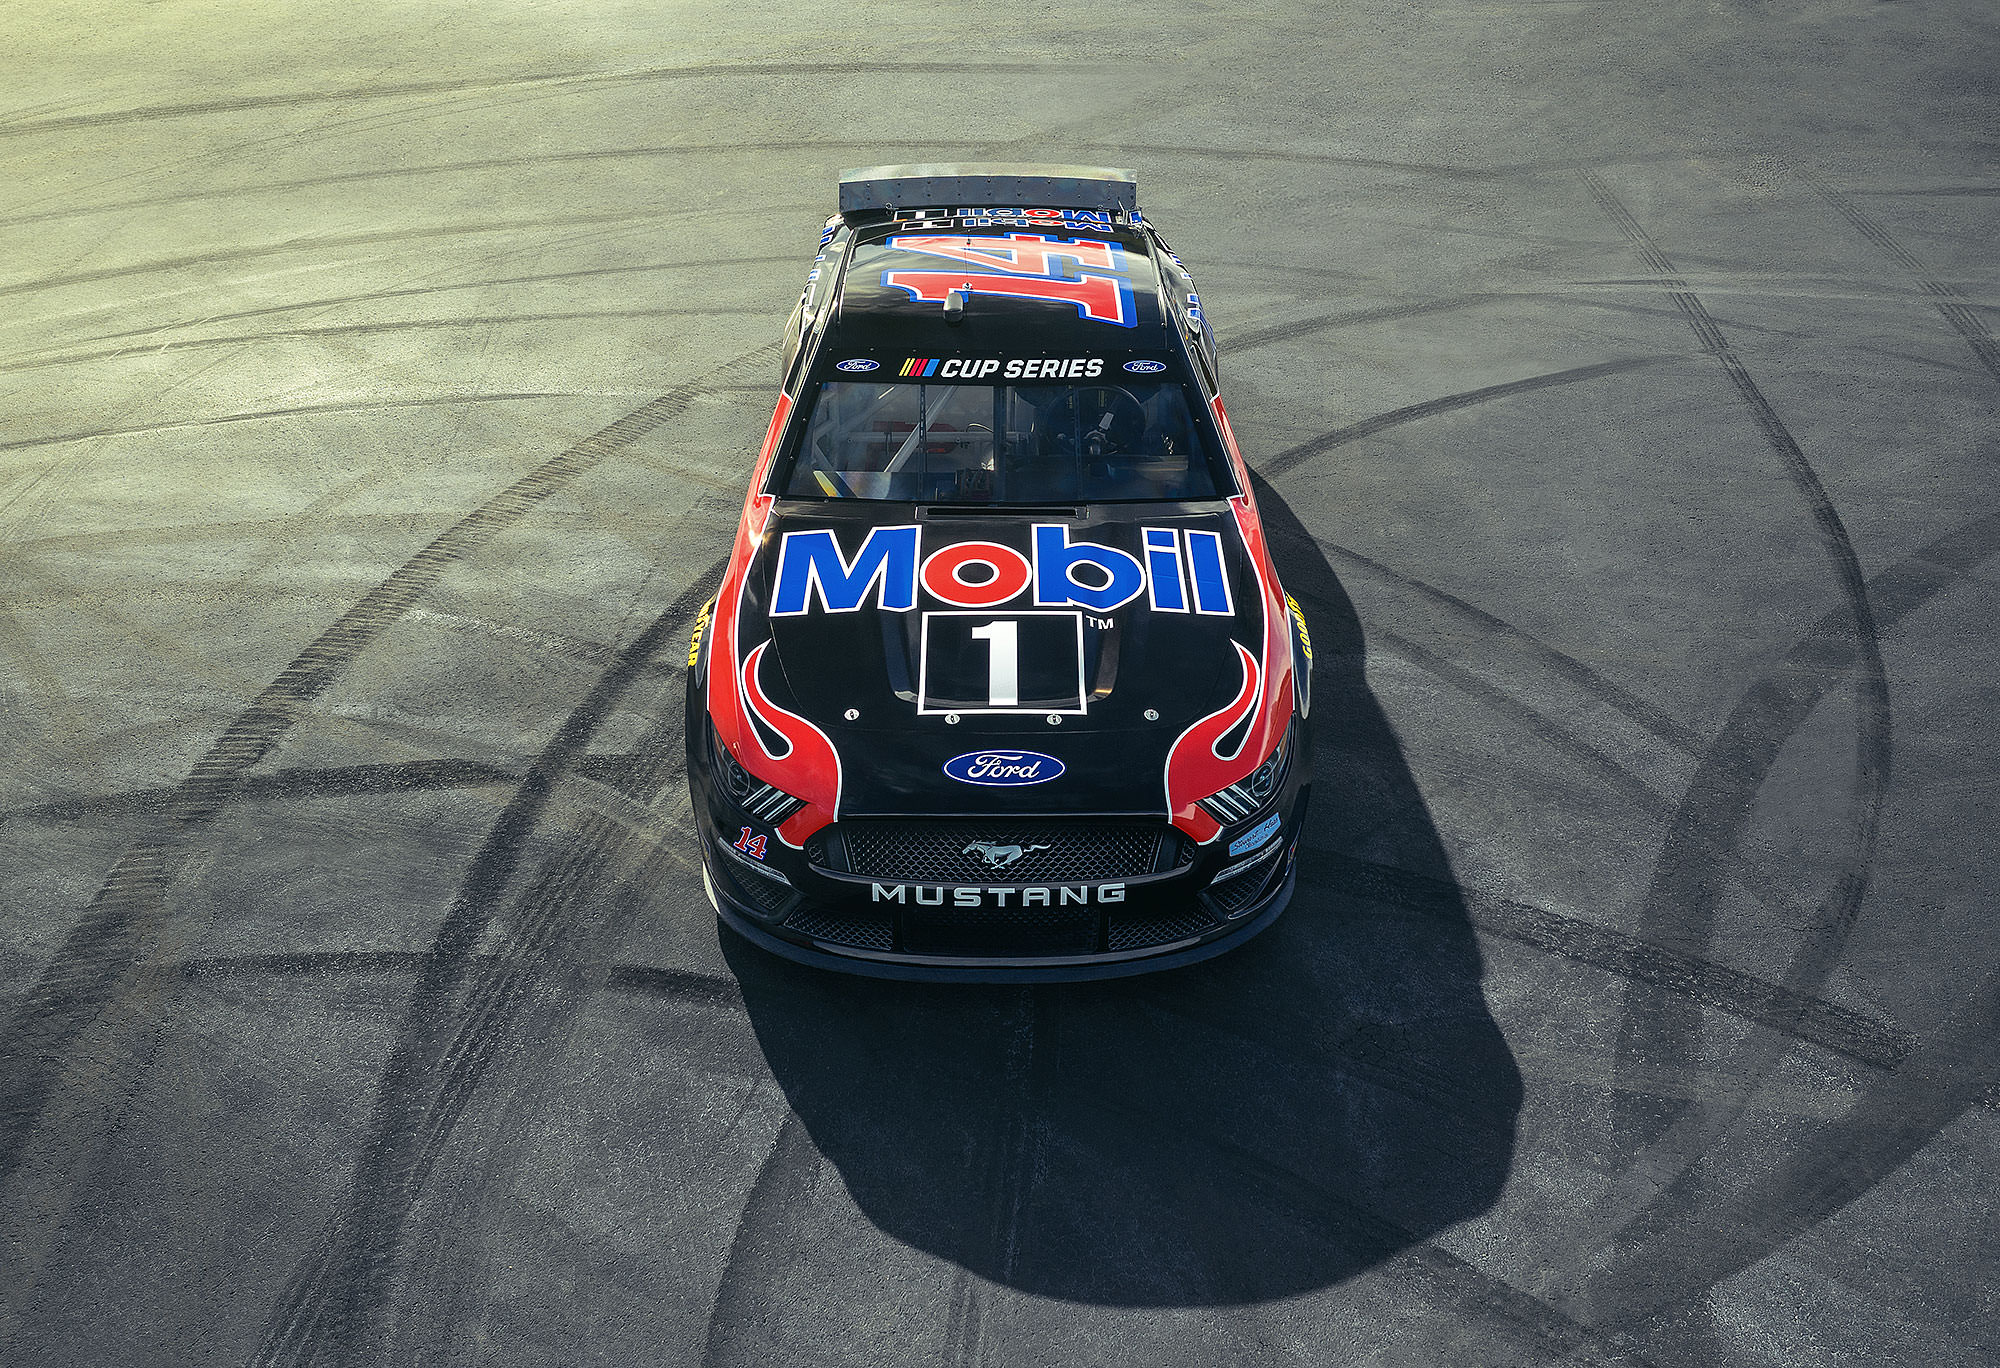 Mobil 1 NASCAR Ford Mustang Clint Bowyer commercial photography